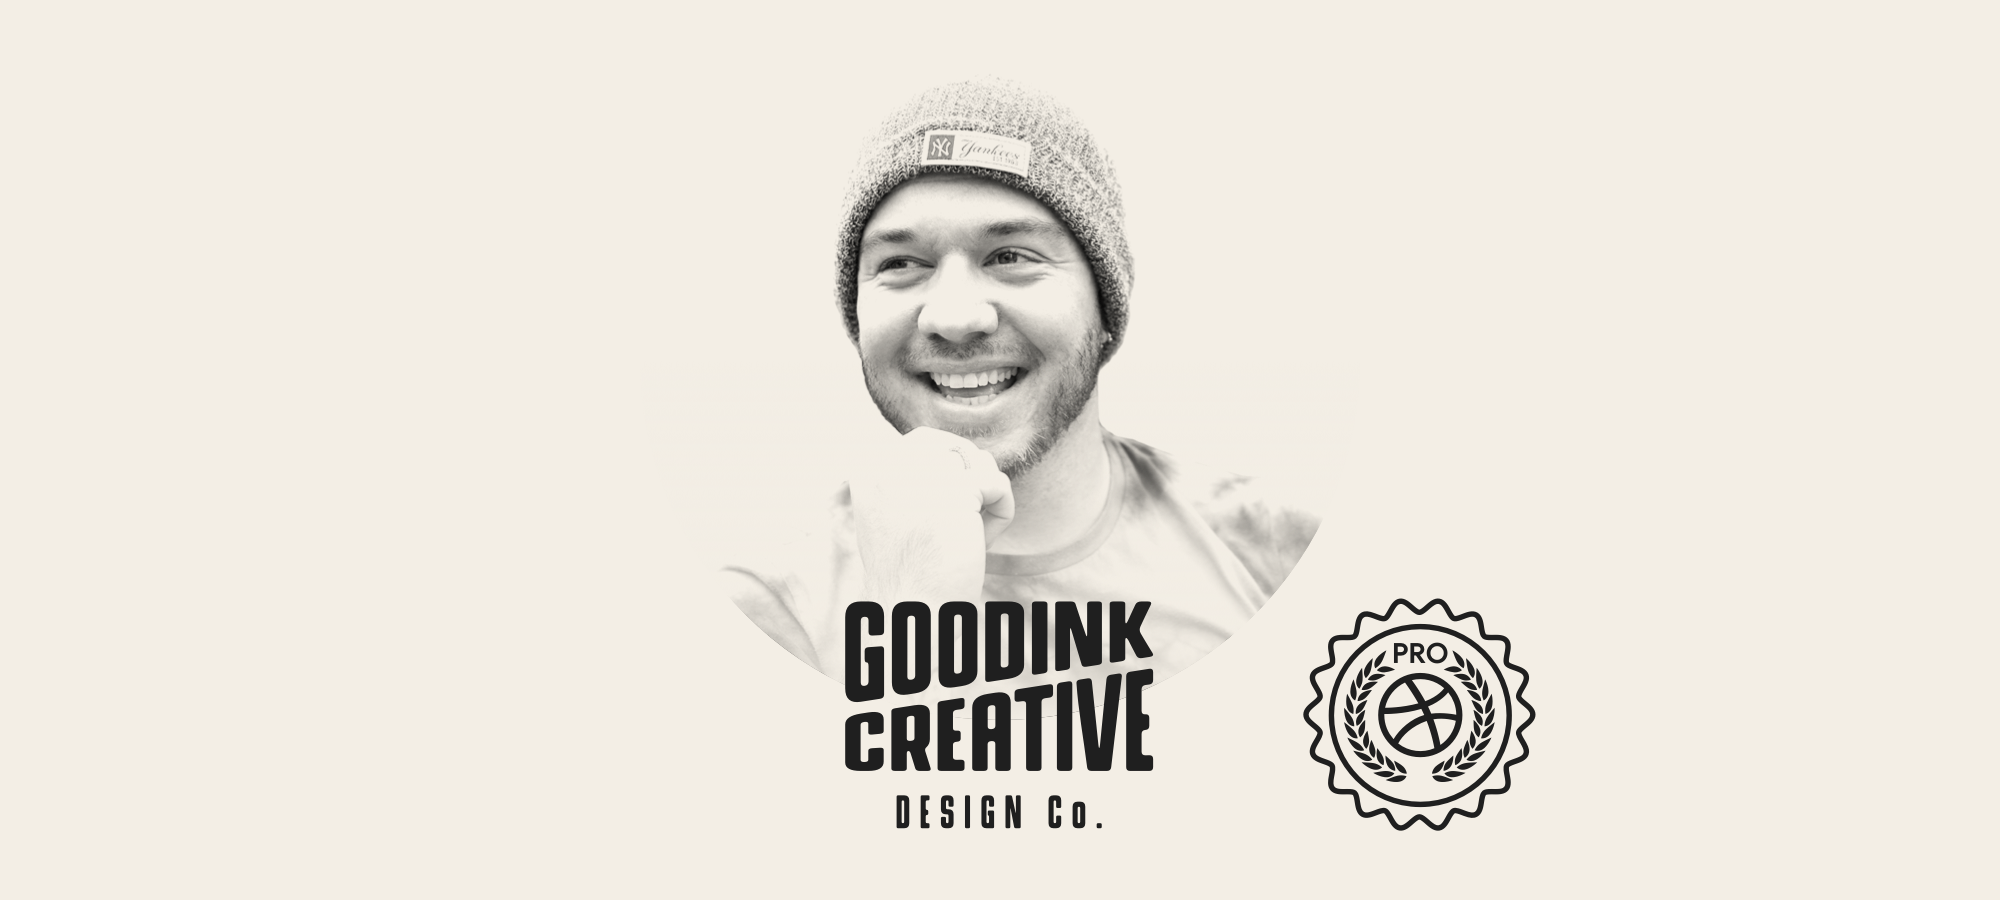 About Steve Goodger of GoodInk